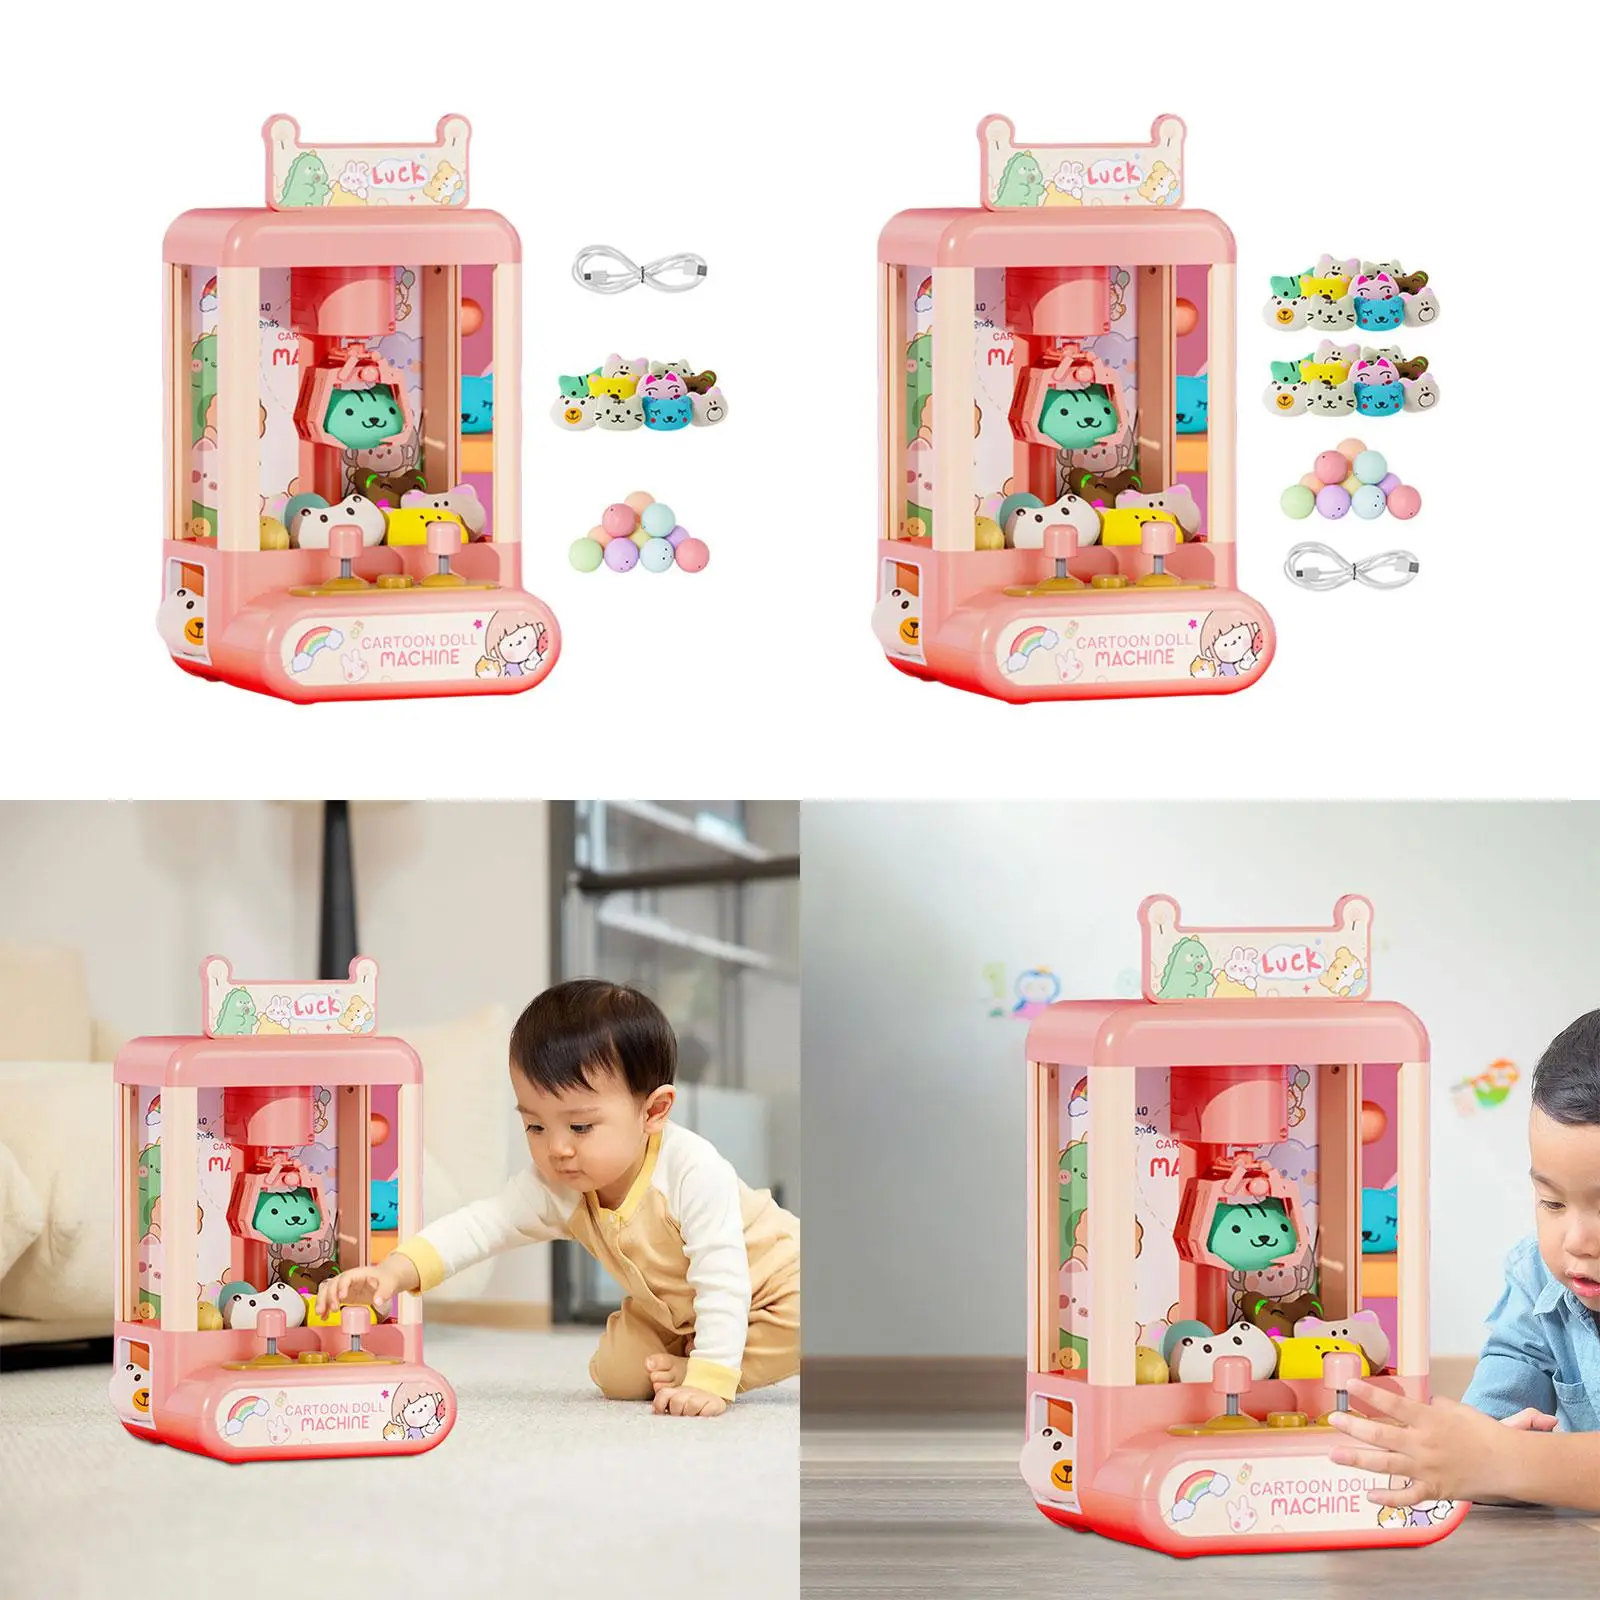 Kids Small Claw Machine Arcade Claw Games Prize Dispenser Toys Doll Machine with Sounds for Girls 6 7 8 9 Year Old Holiday Gifts